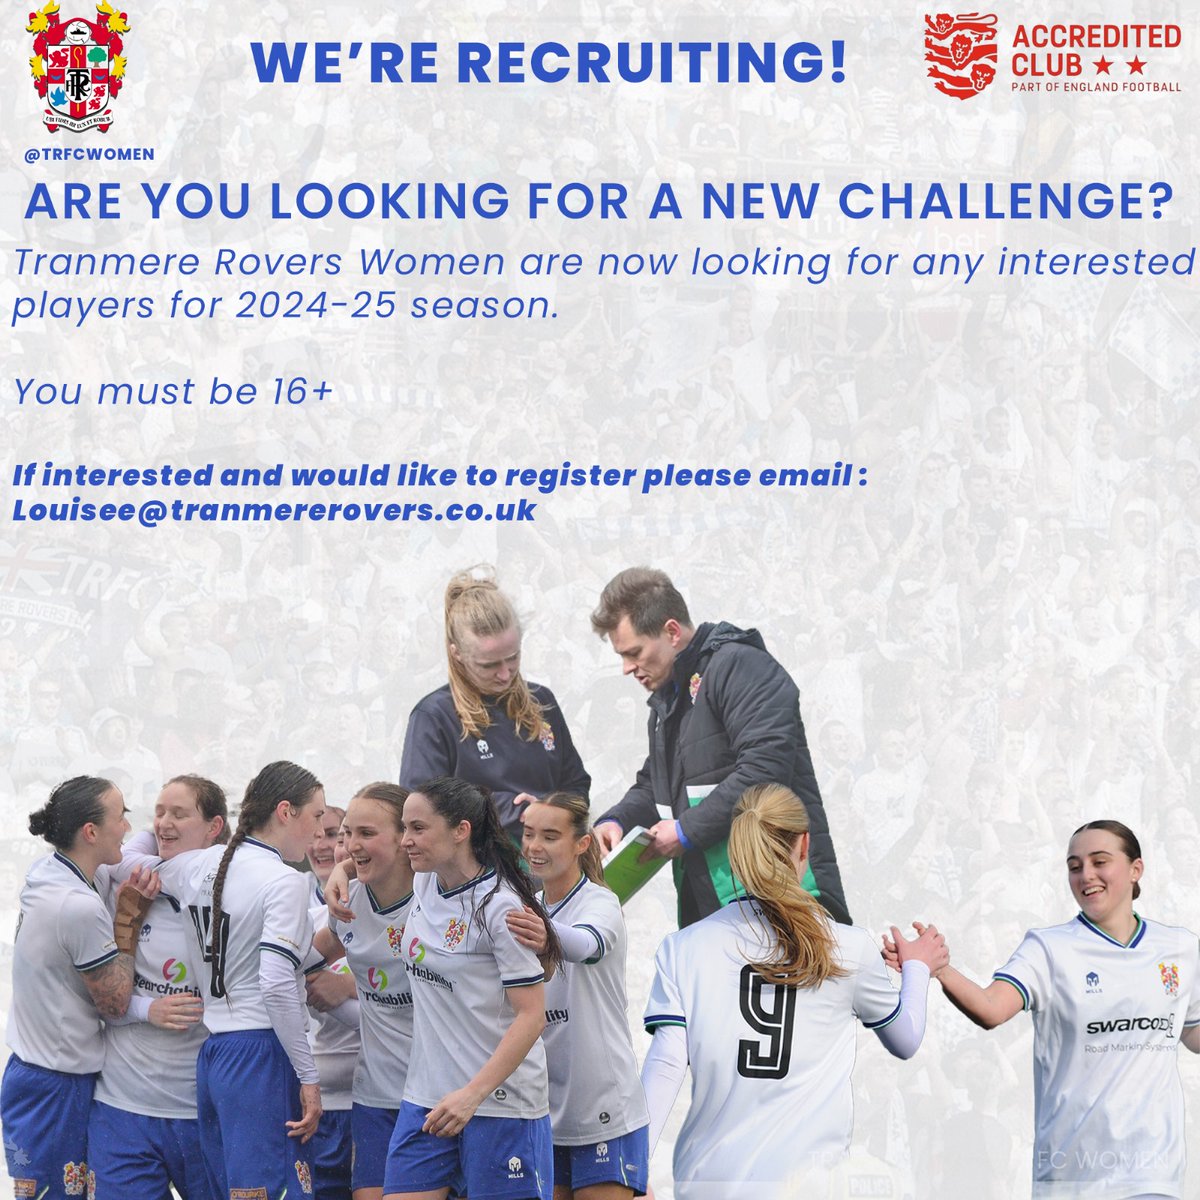 ⚽️Are you looking for a new challenge? At Tranmere Rovers Women we are looking to recruit players for the 2024-25 Season. Please email LouiseE@tranmererovers.co.uk to register your interest today. #TRFC #SWA